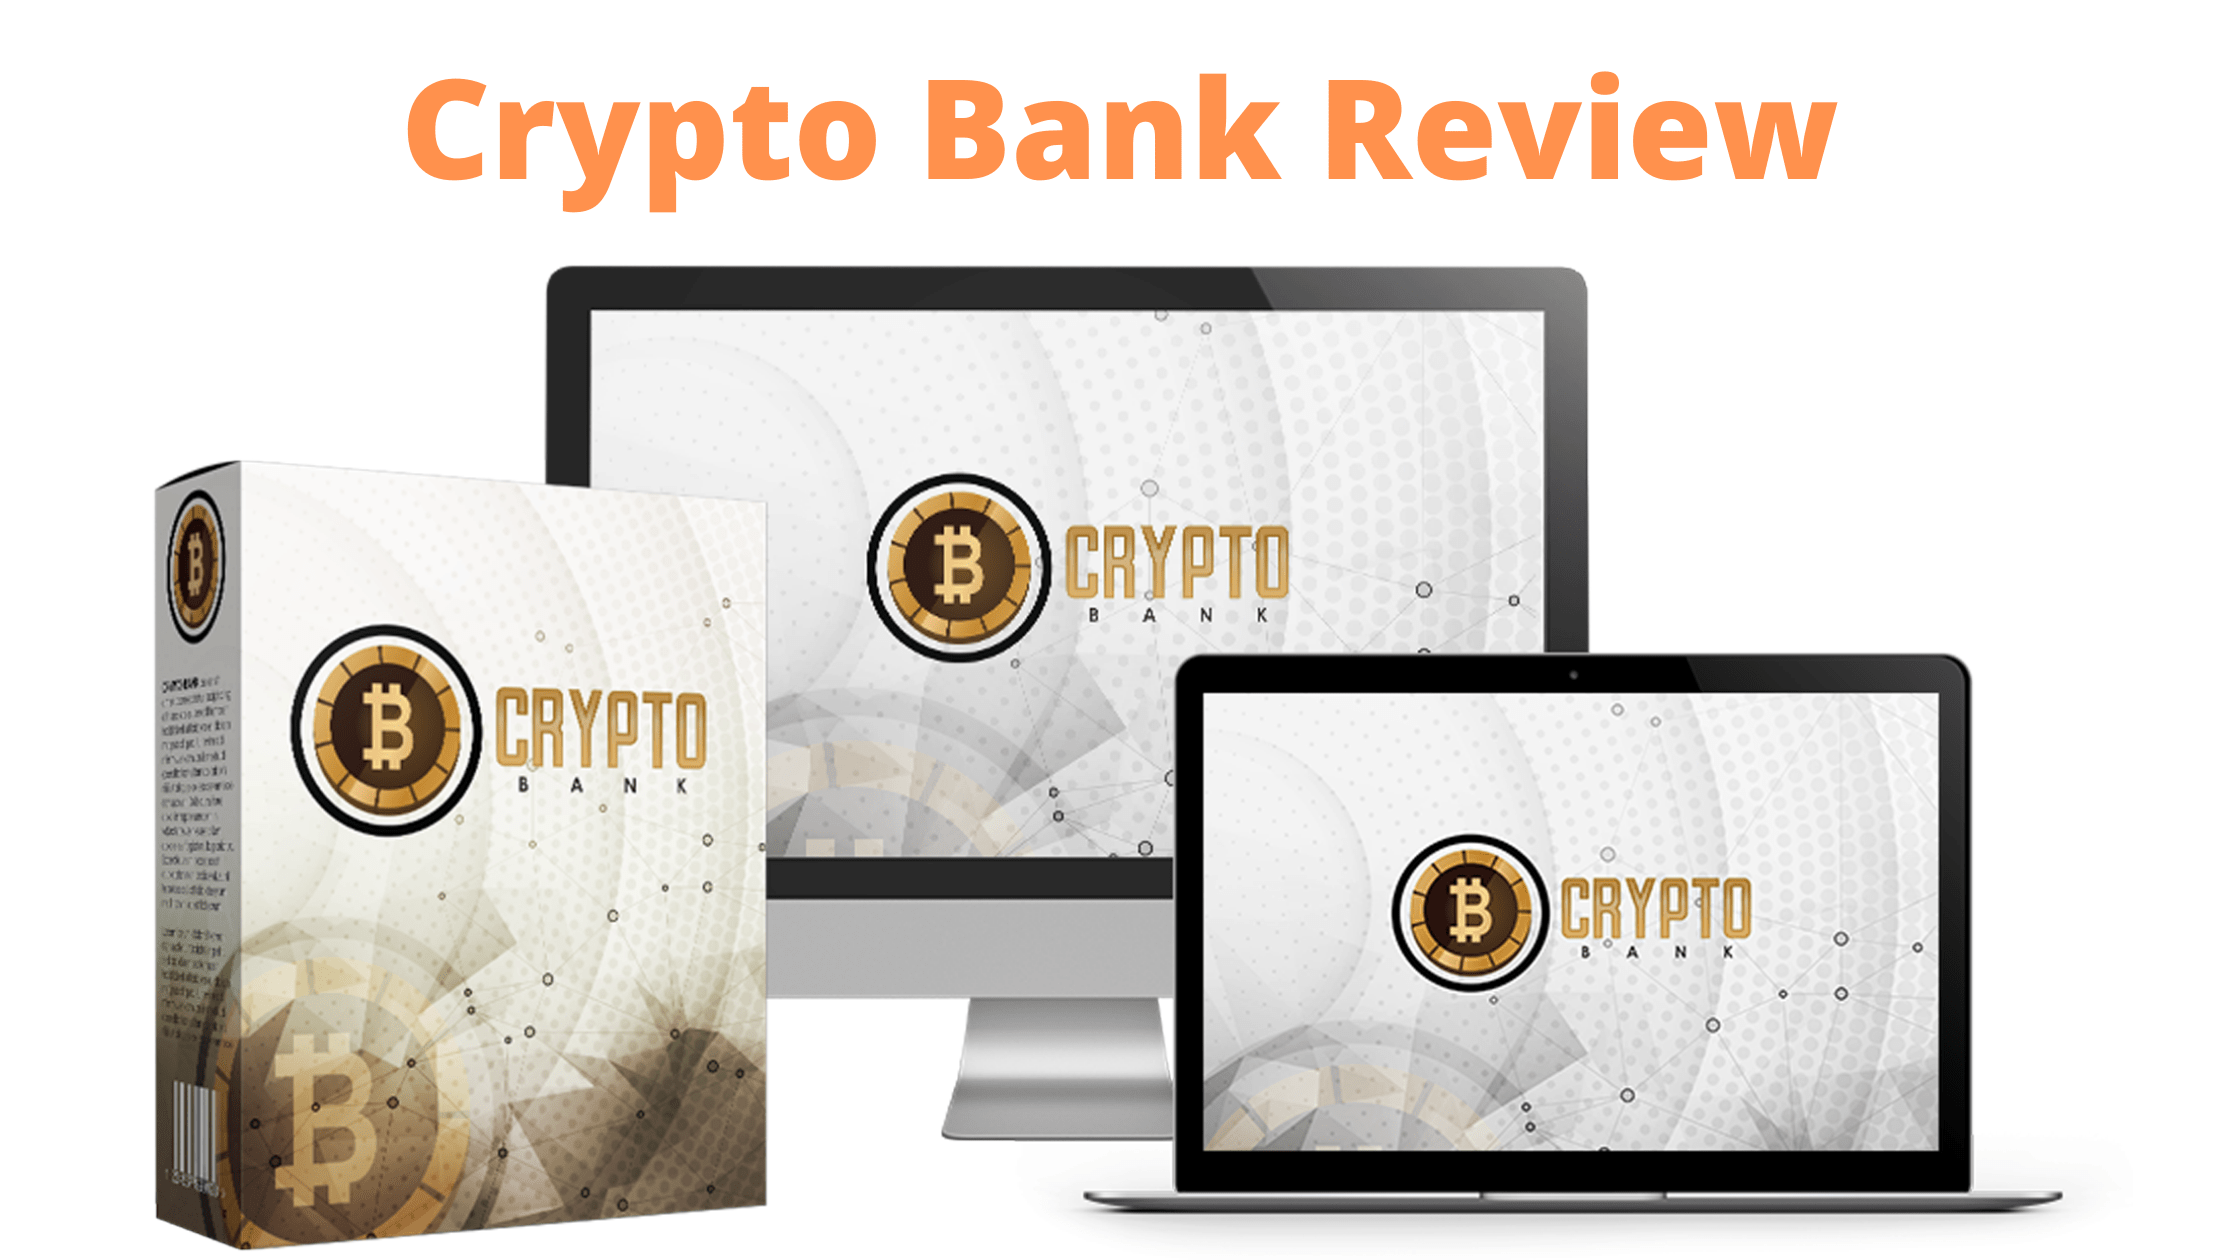 Crypto Bank Review